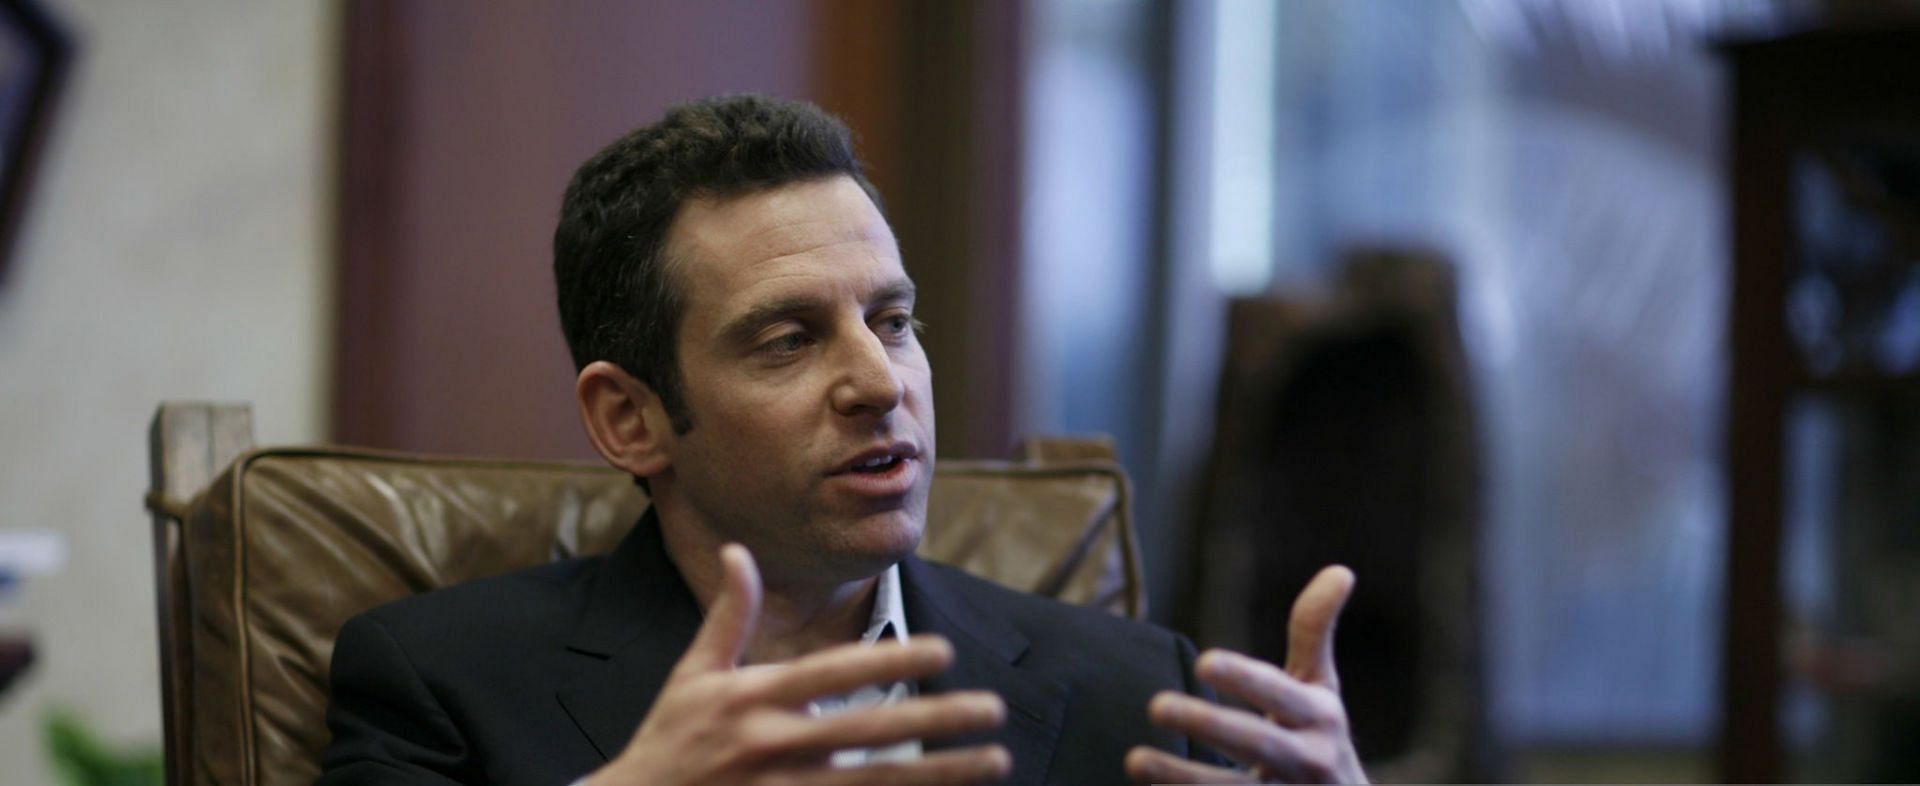 Sam Harris is an American philosopher, author, and podcaster (Image via Getty Images)